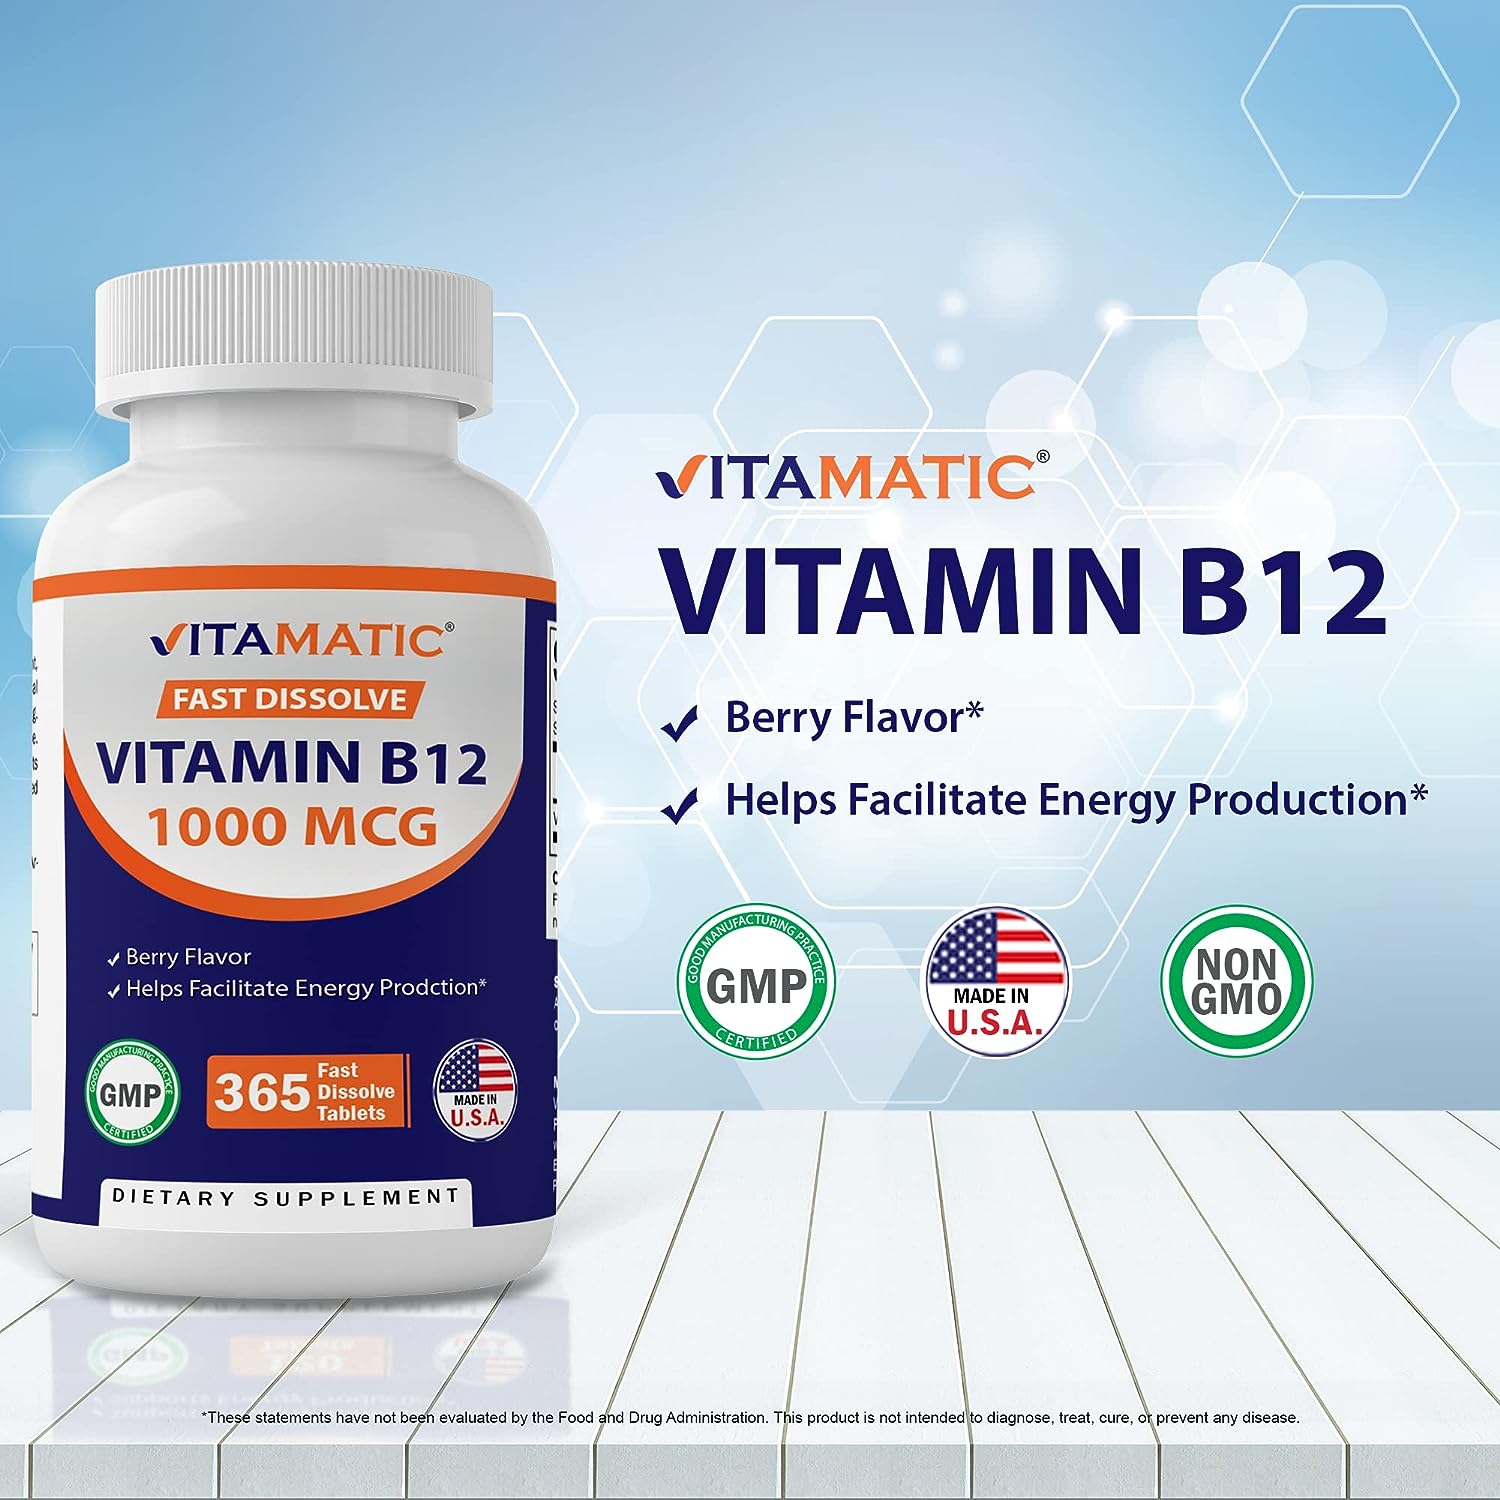 Vitamatic Vitamin B12 1000 mcg Fast Dissolve 365 Tablets - Berry Flavor - Supports Energy Metabolism (1 Bottle)